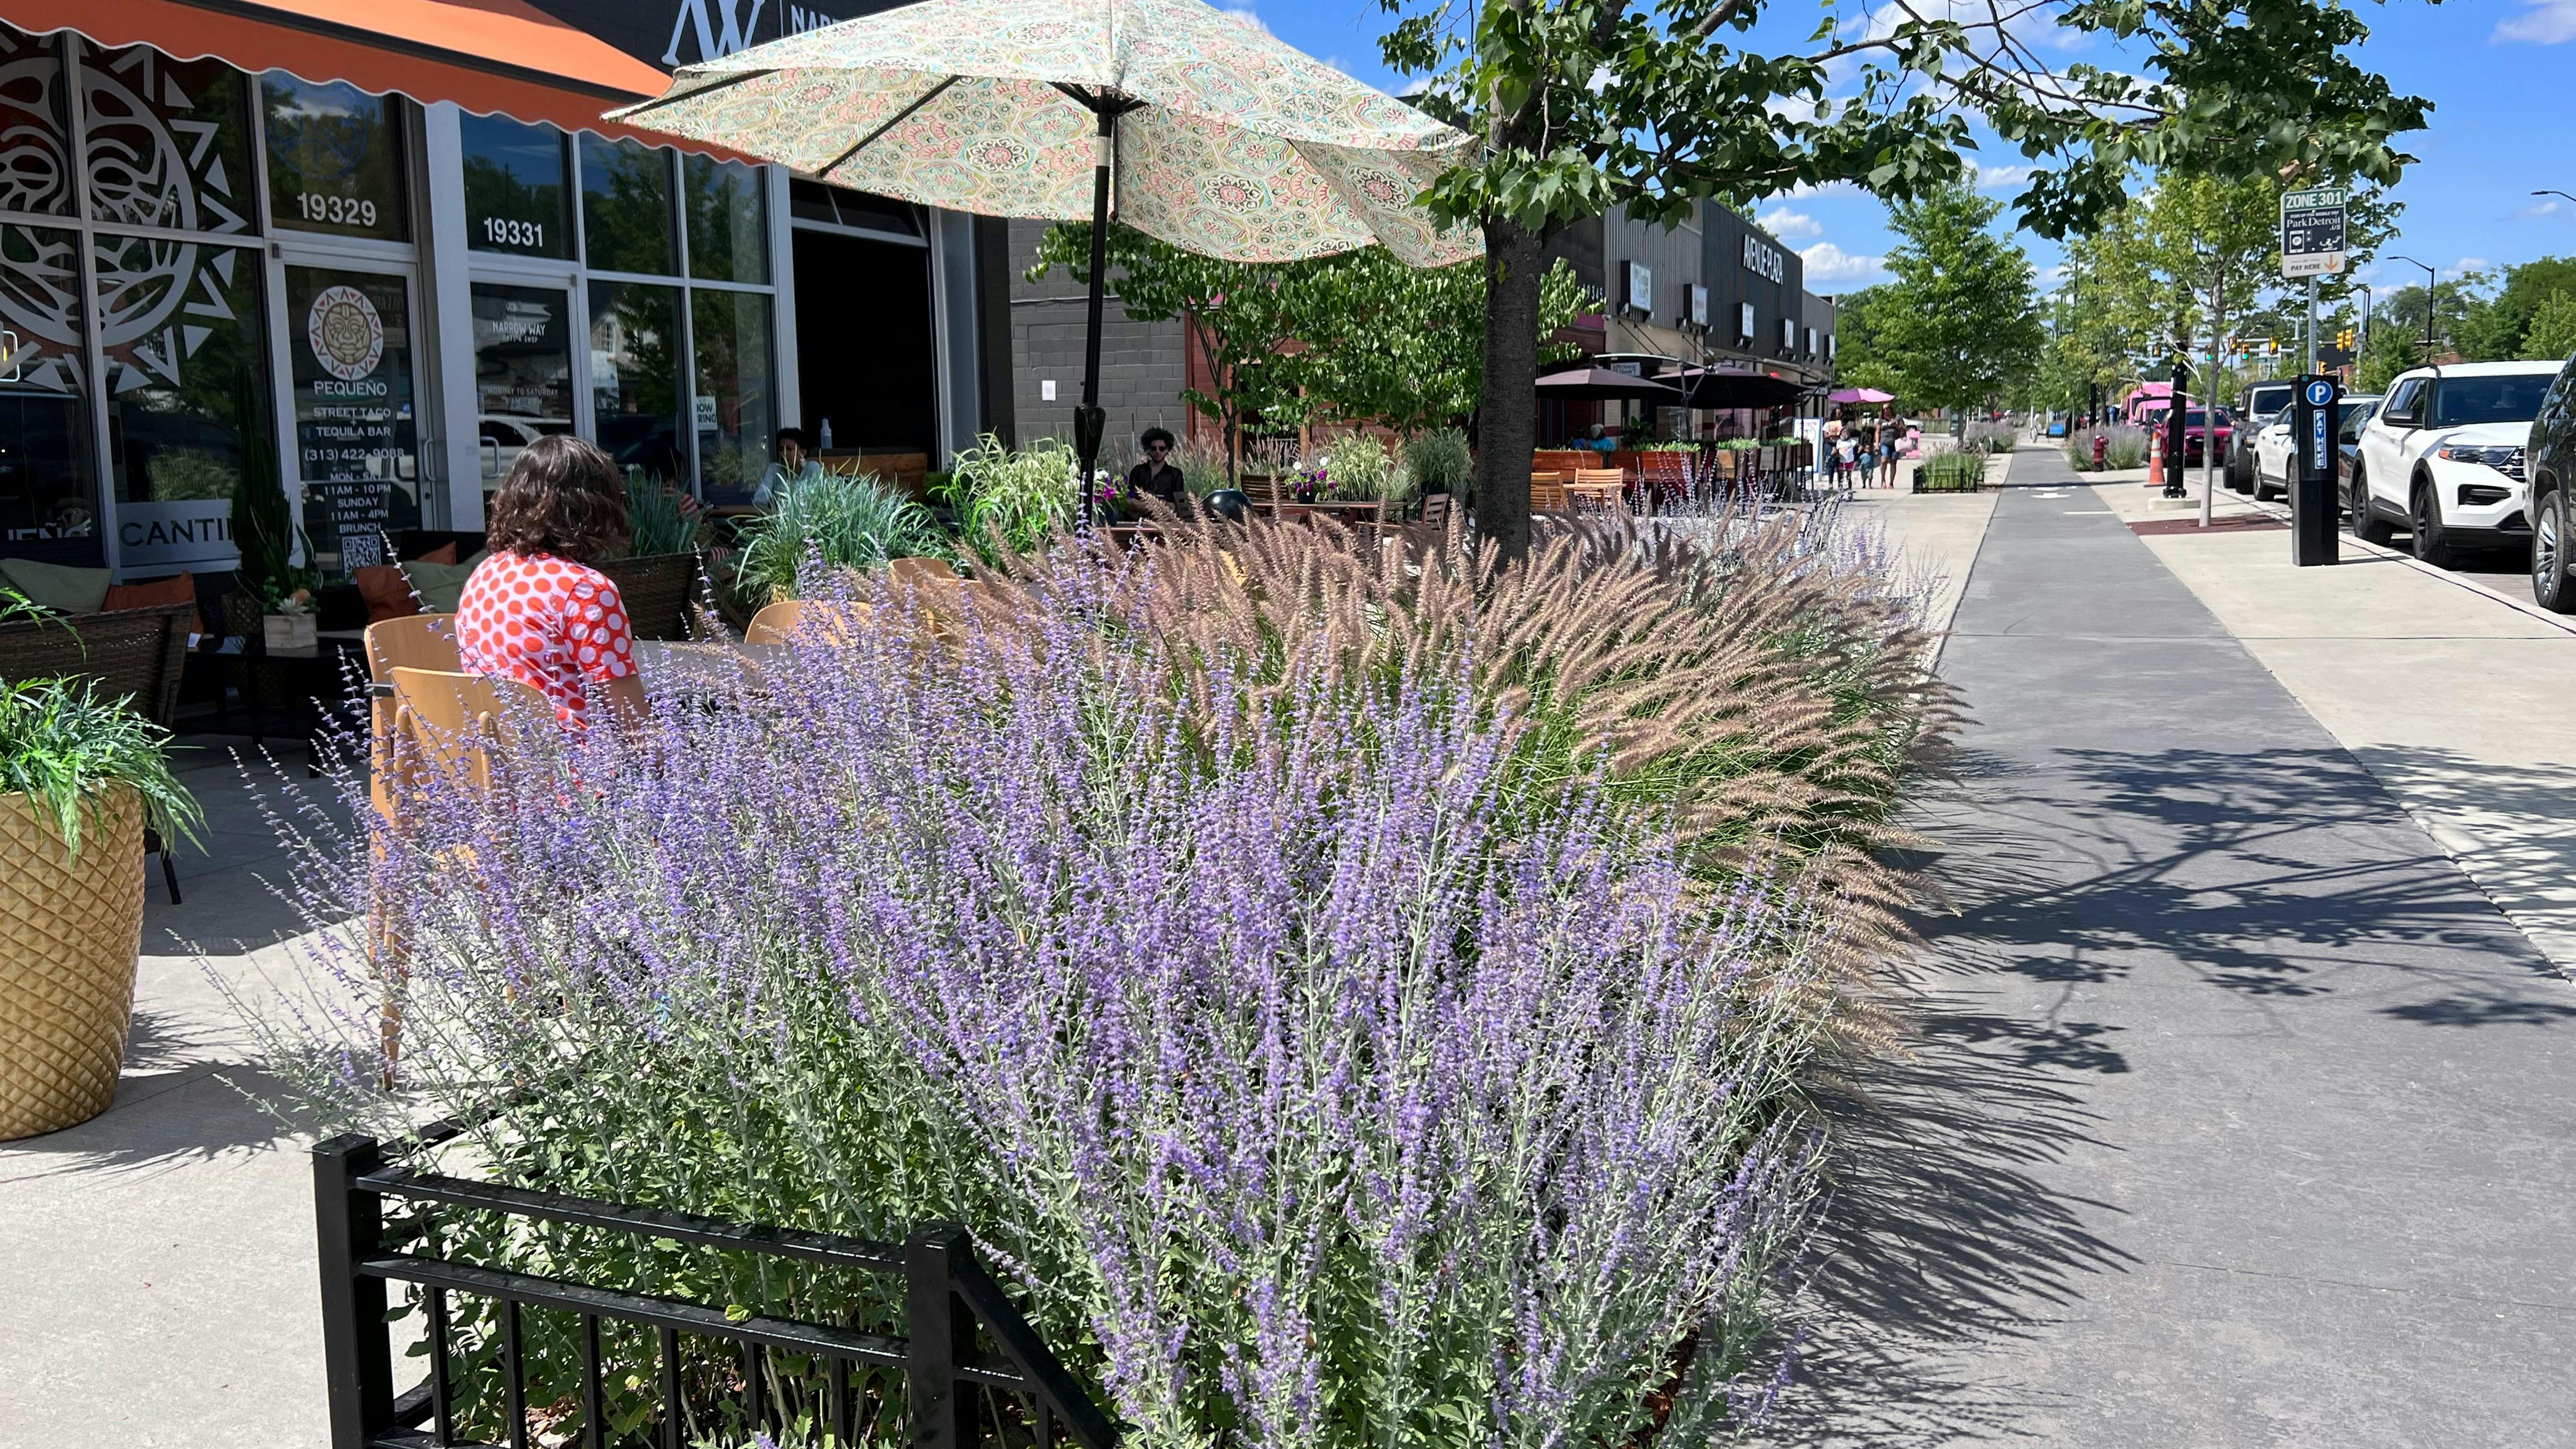 Installed photograph of lush salvia and ornamental grasses dividing outdoor seating outside storefronts and bike lanes.